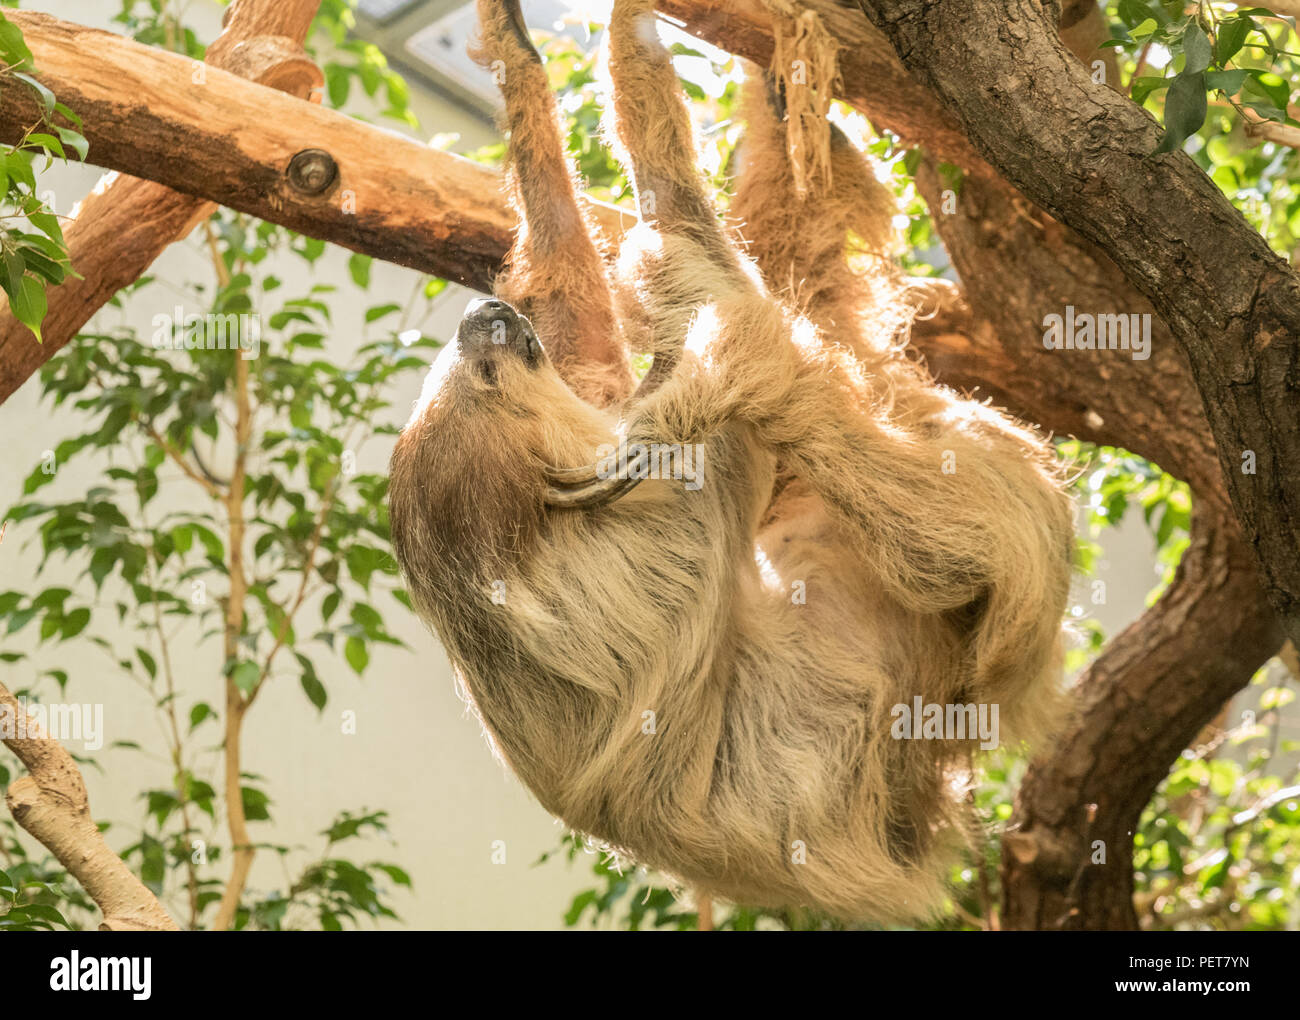 A very relaxed and chill three-toed, light brown Sloth, that is hanging from a tree by its legs, while scratching itself. Stock Photo